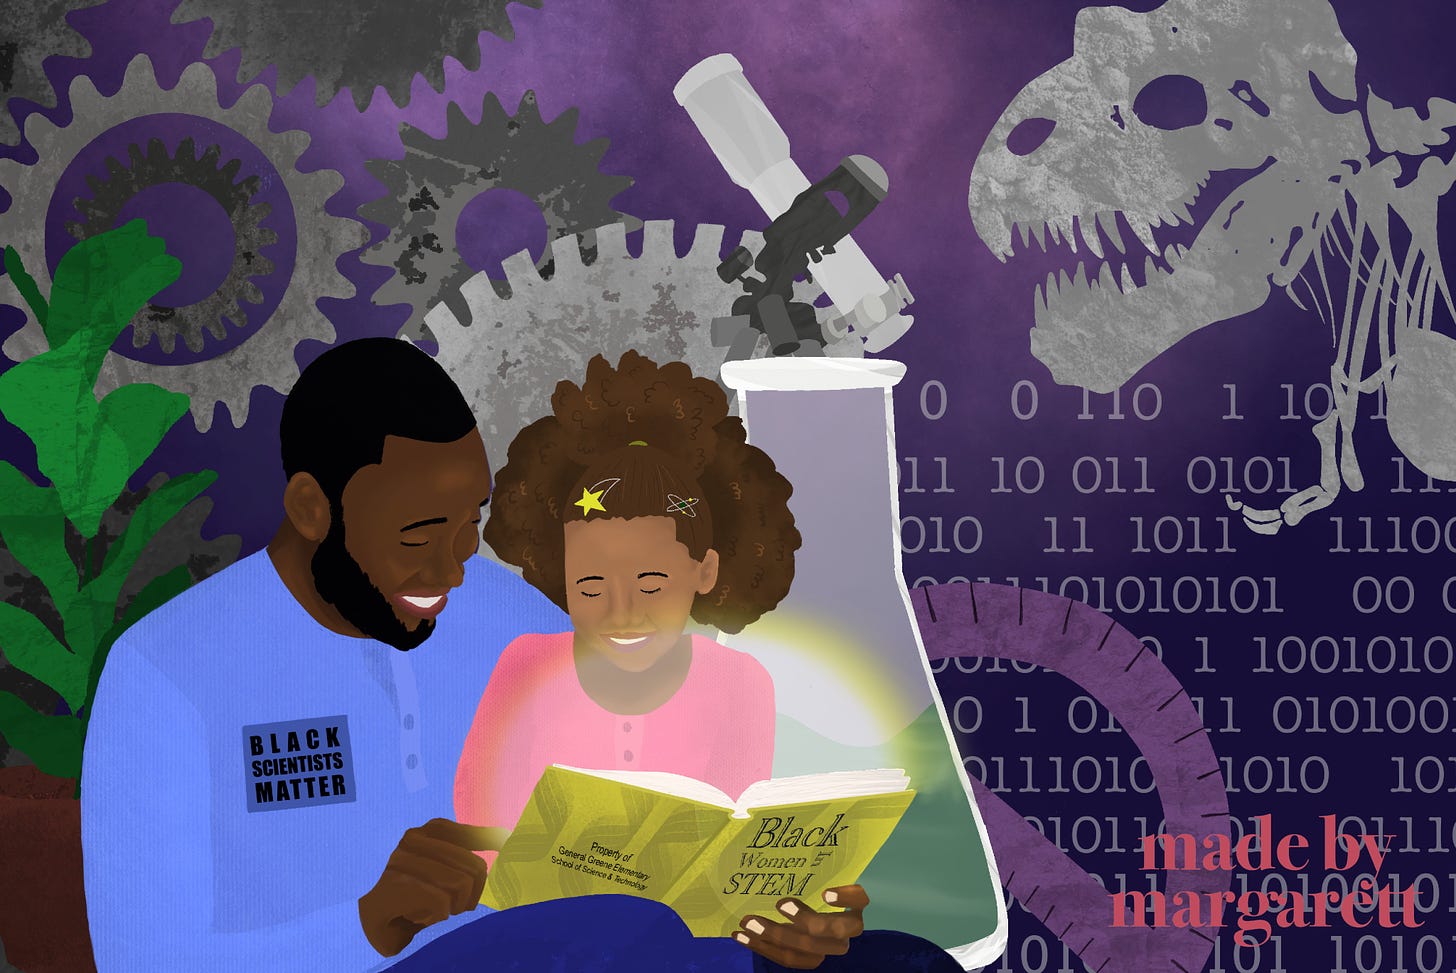 Graphic art depicting a Black father reading a book titled "Black Women in STEM" with his daughter who is also Black. The father is wearing a shirt that reads "Black Scientists Matter." Gears, a telescope, a chemistry flask, binary code, and dinosaur bones are in the background.